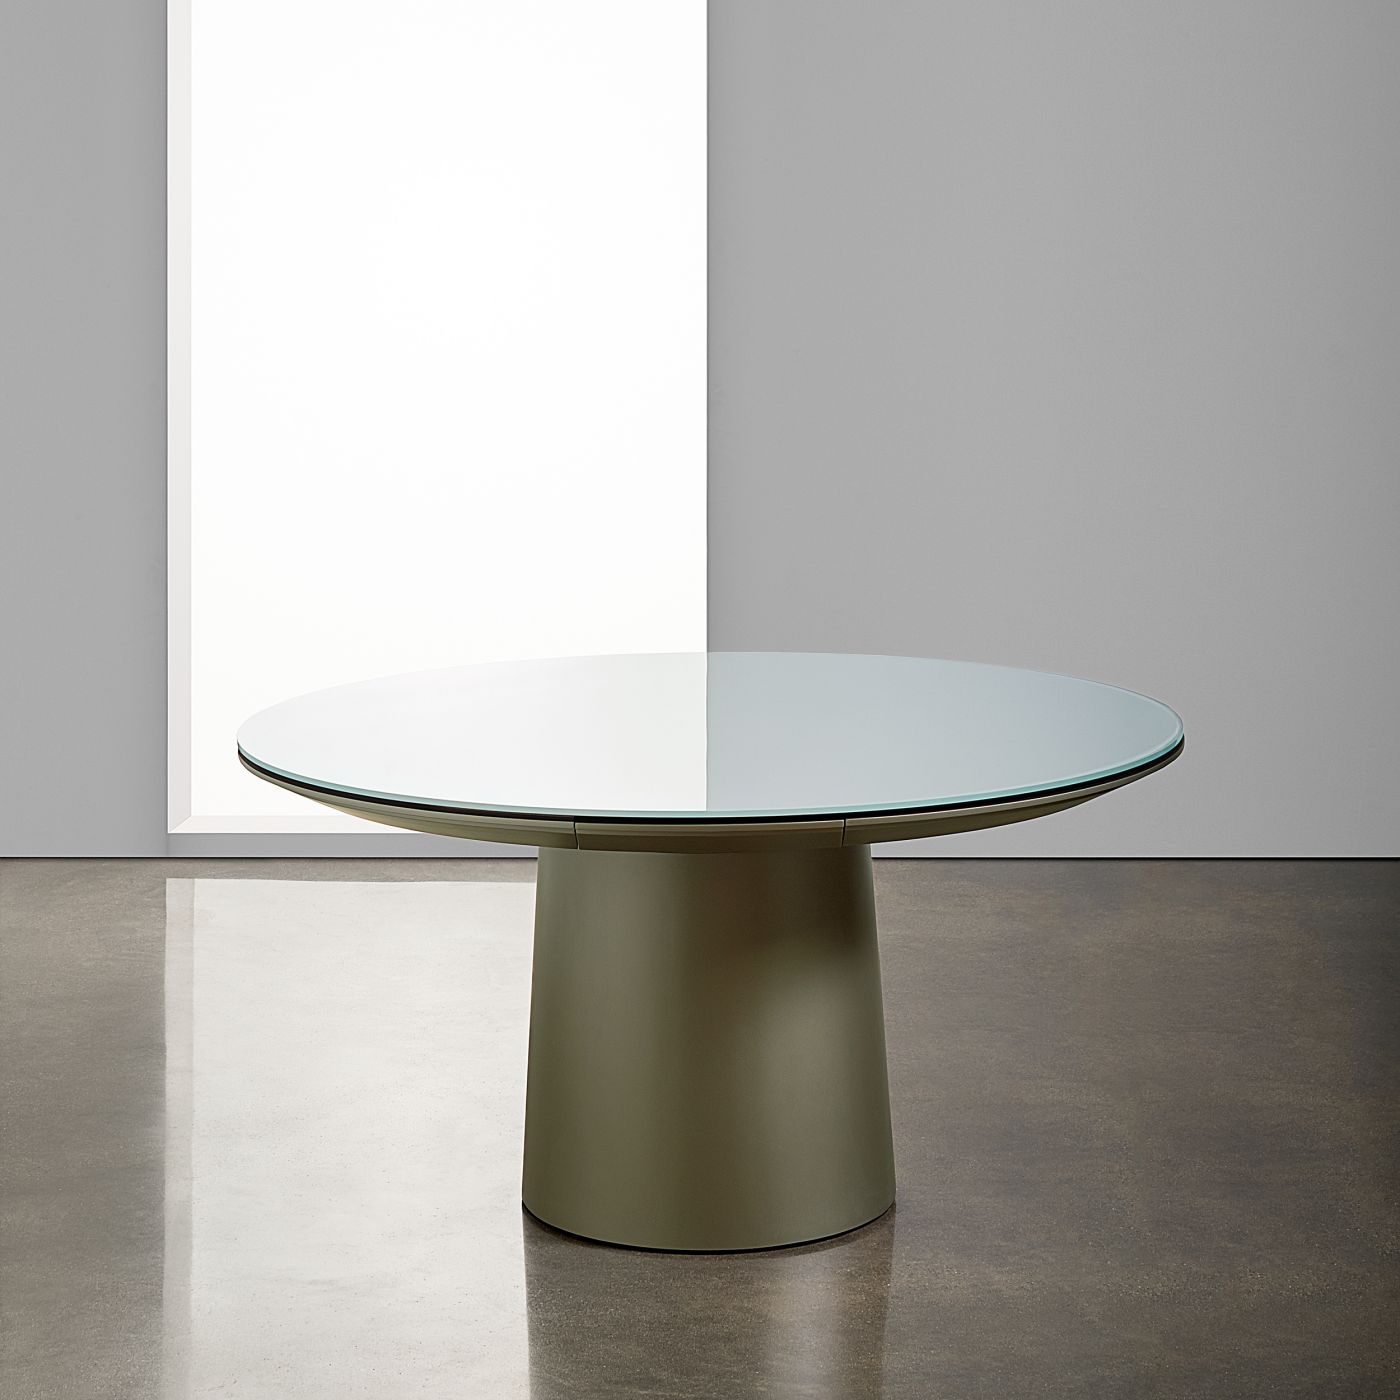  A round tapered base table offers modern simplicity and connectivity.